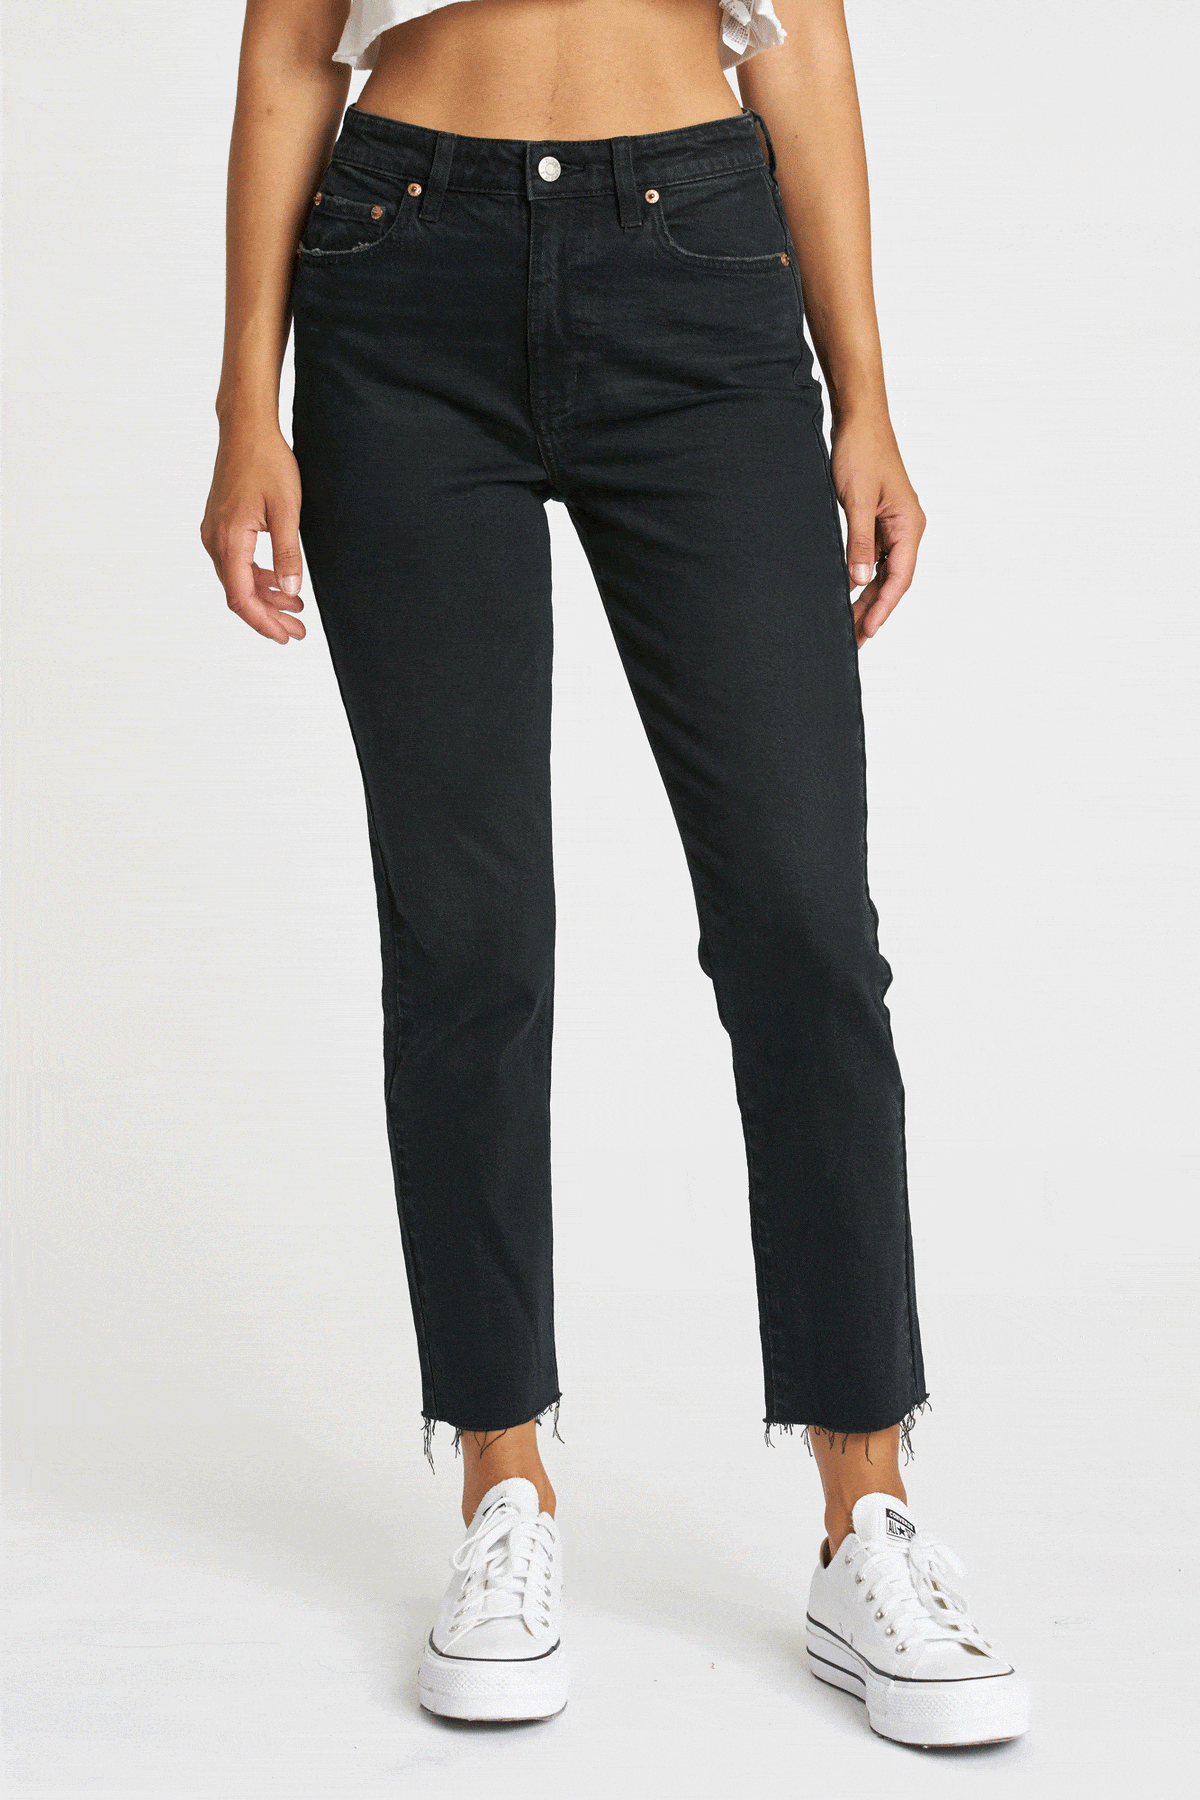 DAZE Denim Daily Driver High Rise Skinny Straight in Inked - Pants - Blooming Daily